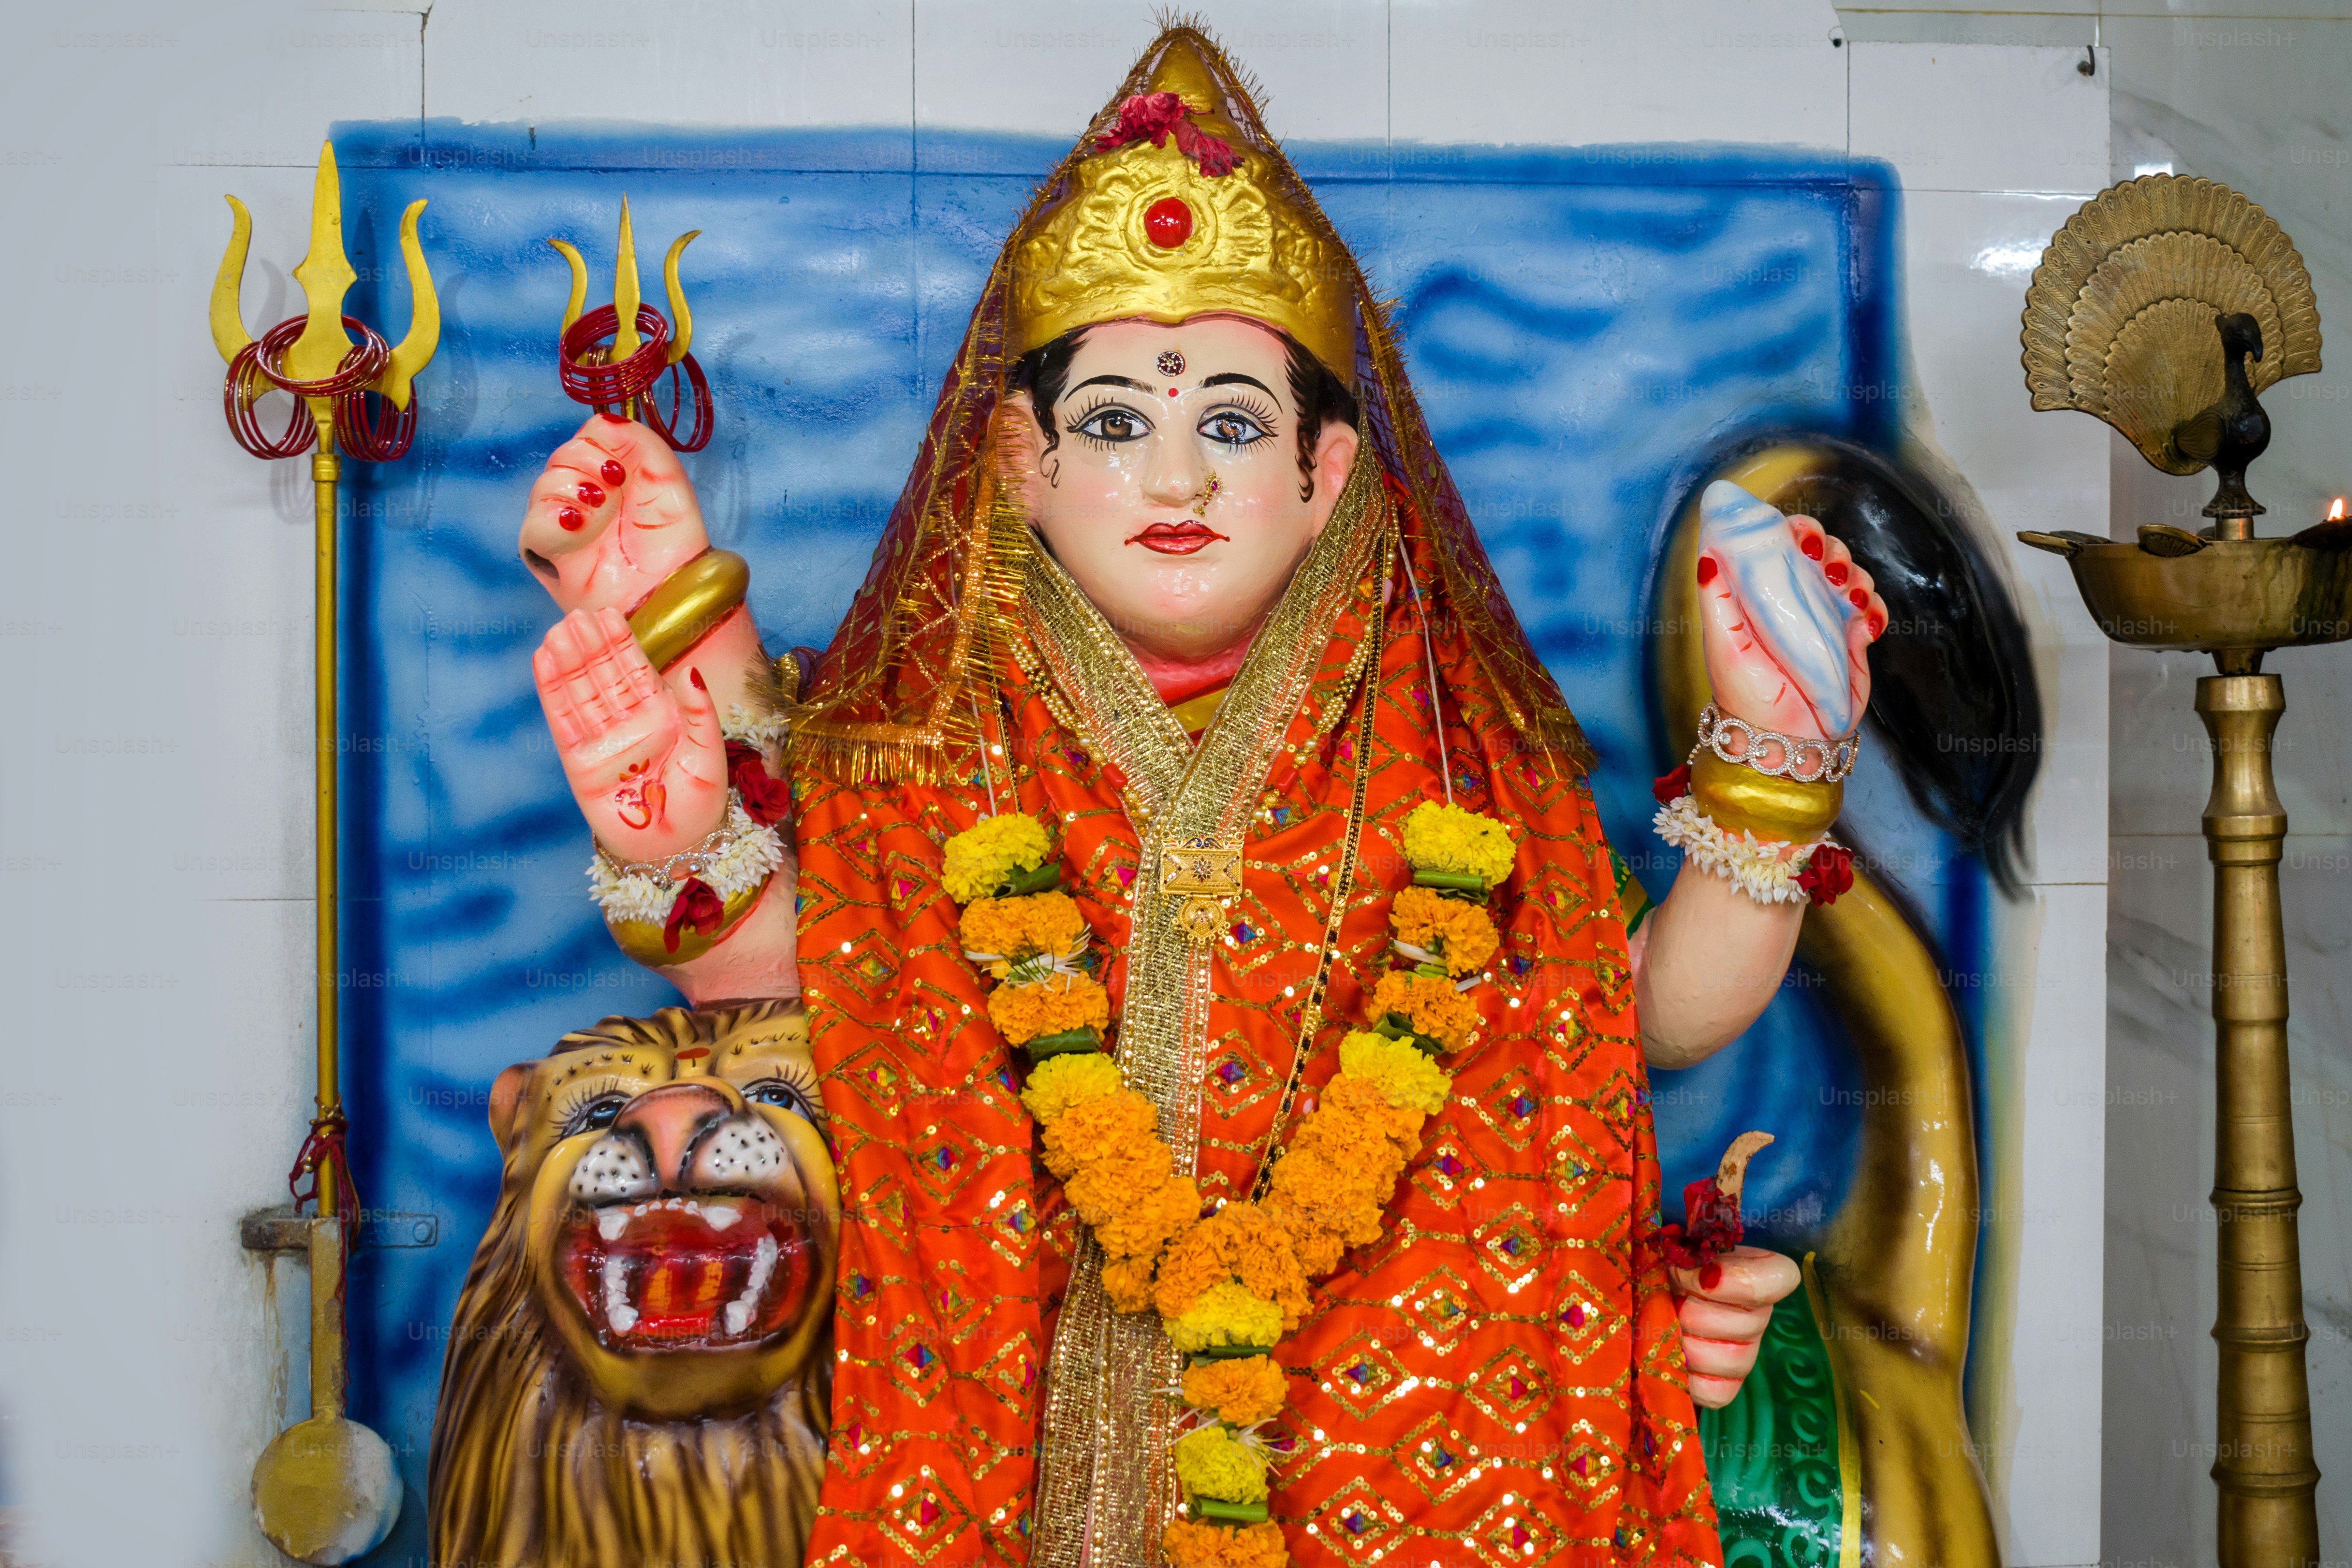 A beautiful idol of Maa Durga being worshipped at a Hindu temple in Mumbai, India for the festival of Navratri or Durga Puja